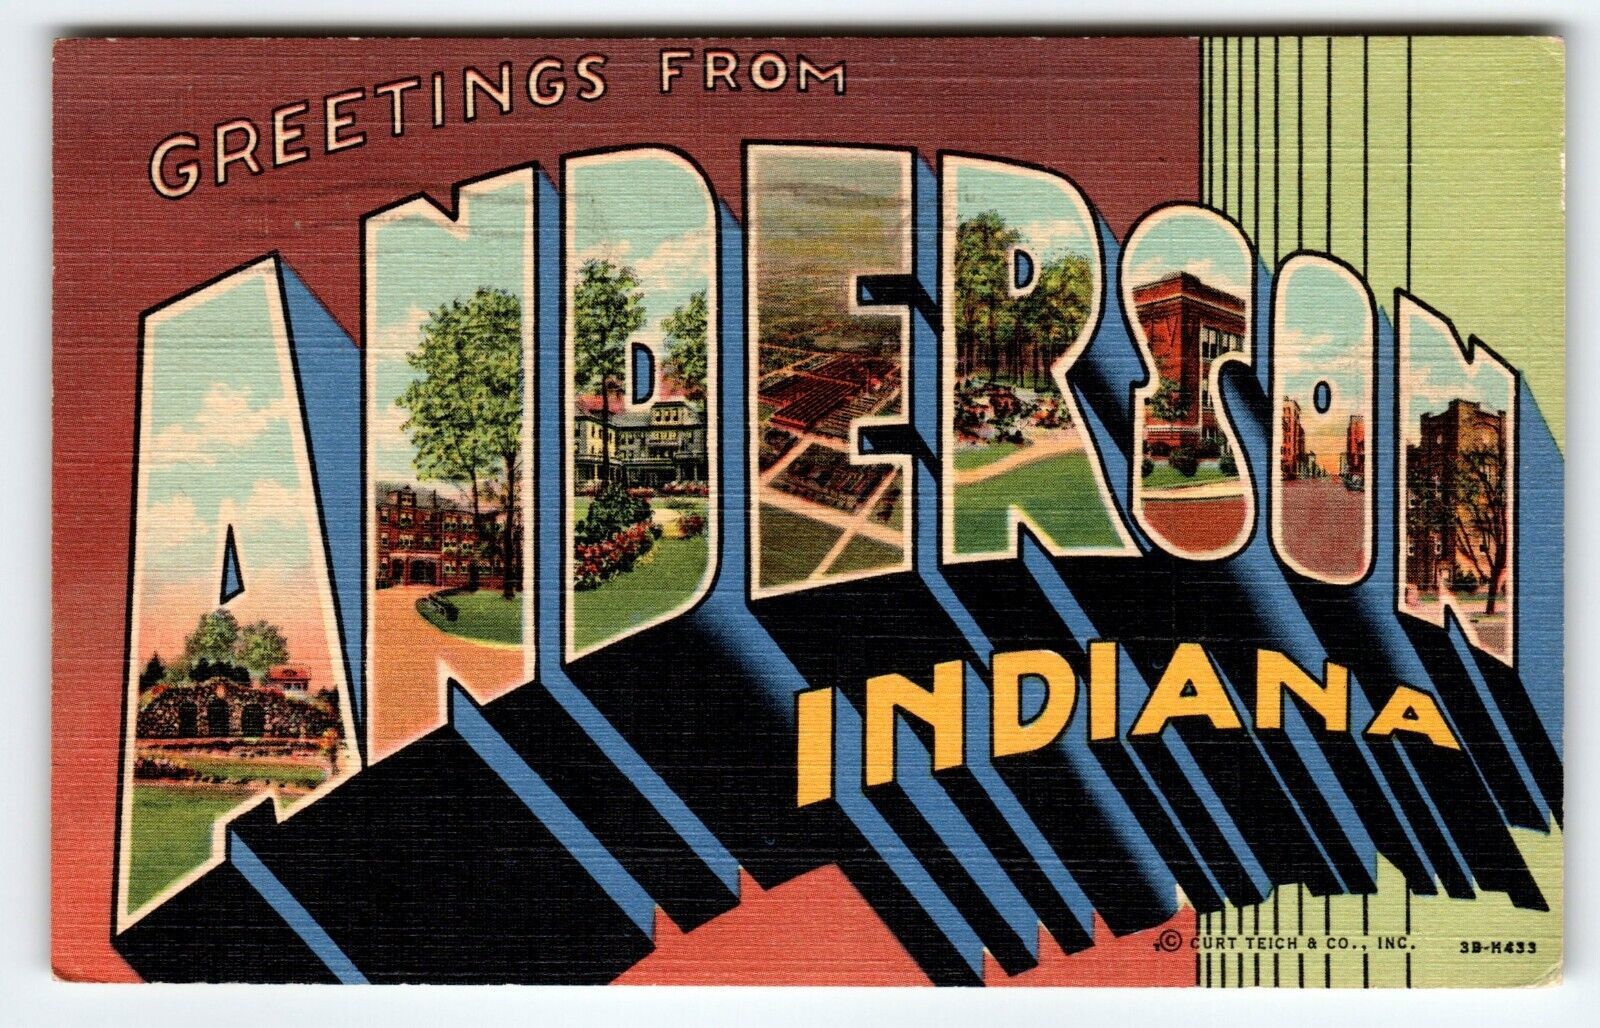 Greetings From Anderson Indiana Postcard Large Big Letter Linen 1951 Curt Teich - $12.83